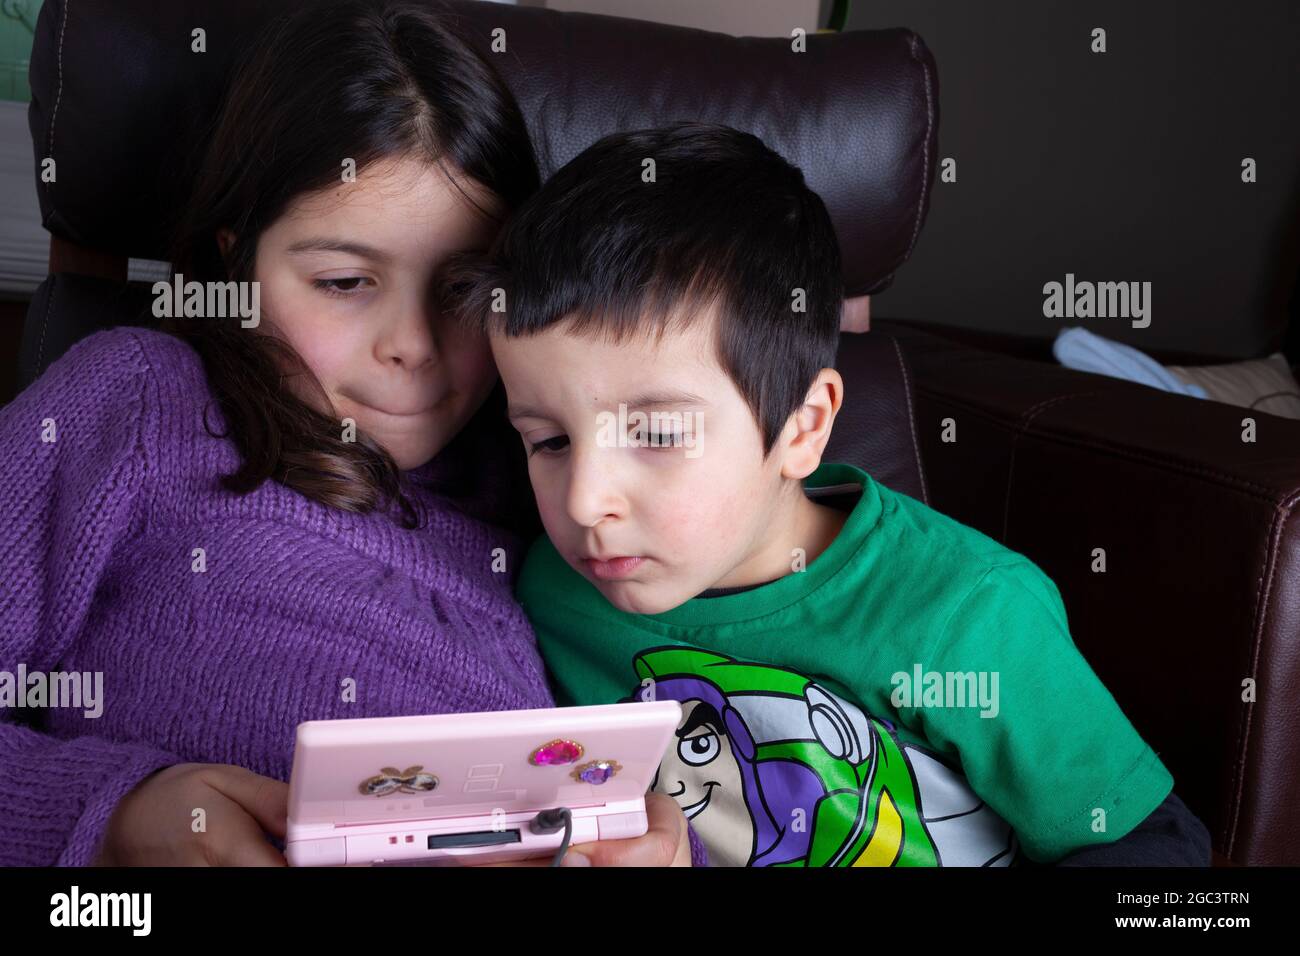 Siblings, brother and sister play video game together Stock Photo